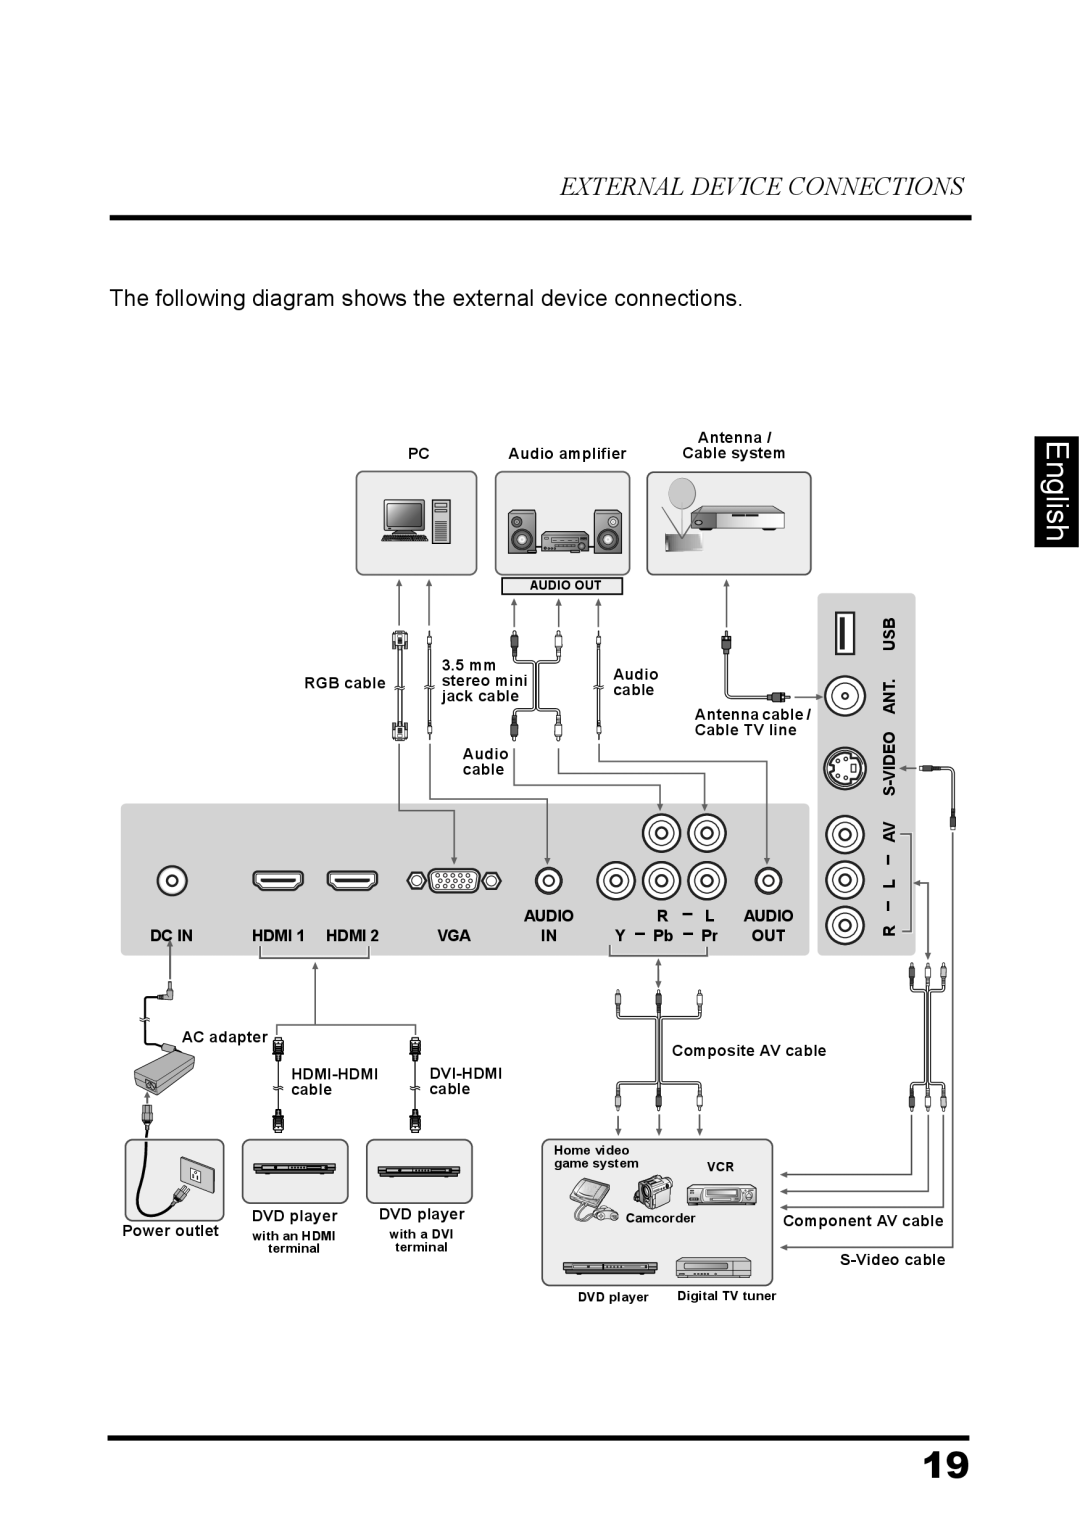 Westinghouse LD-3237 English, External Device Connections, The following diagram shows the external device connections 